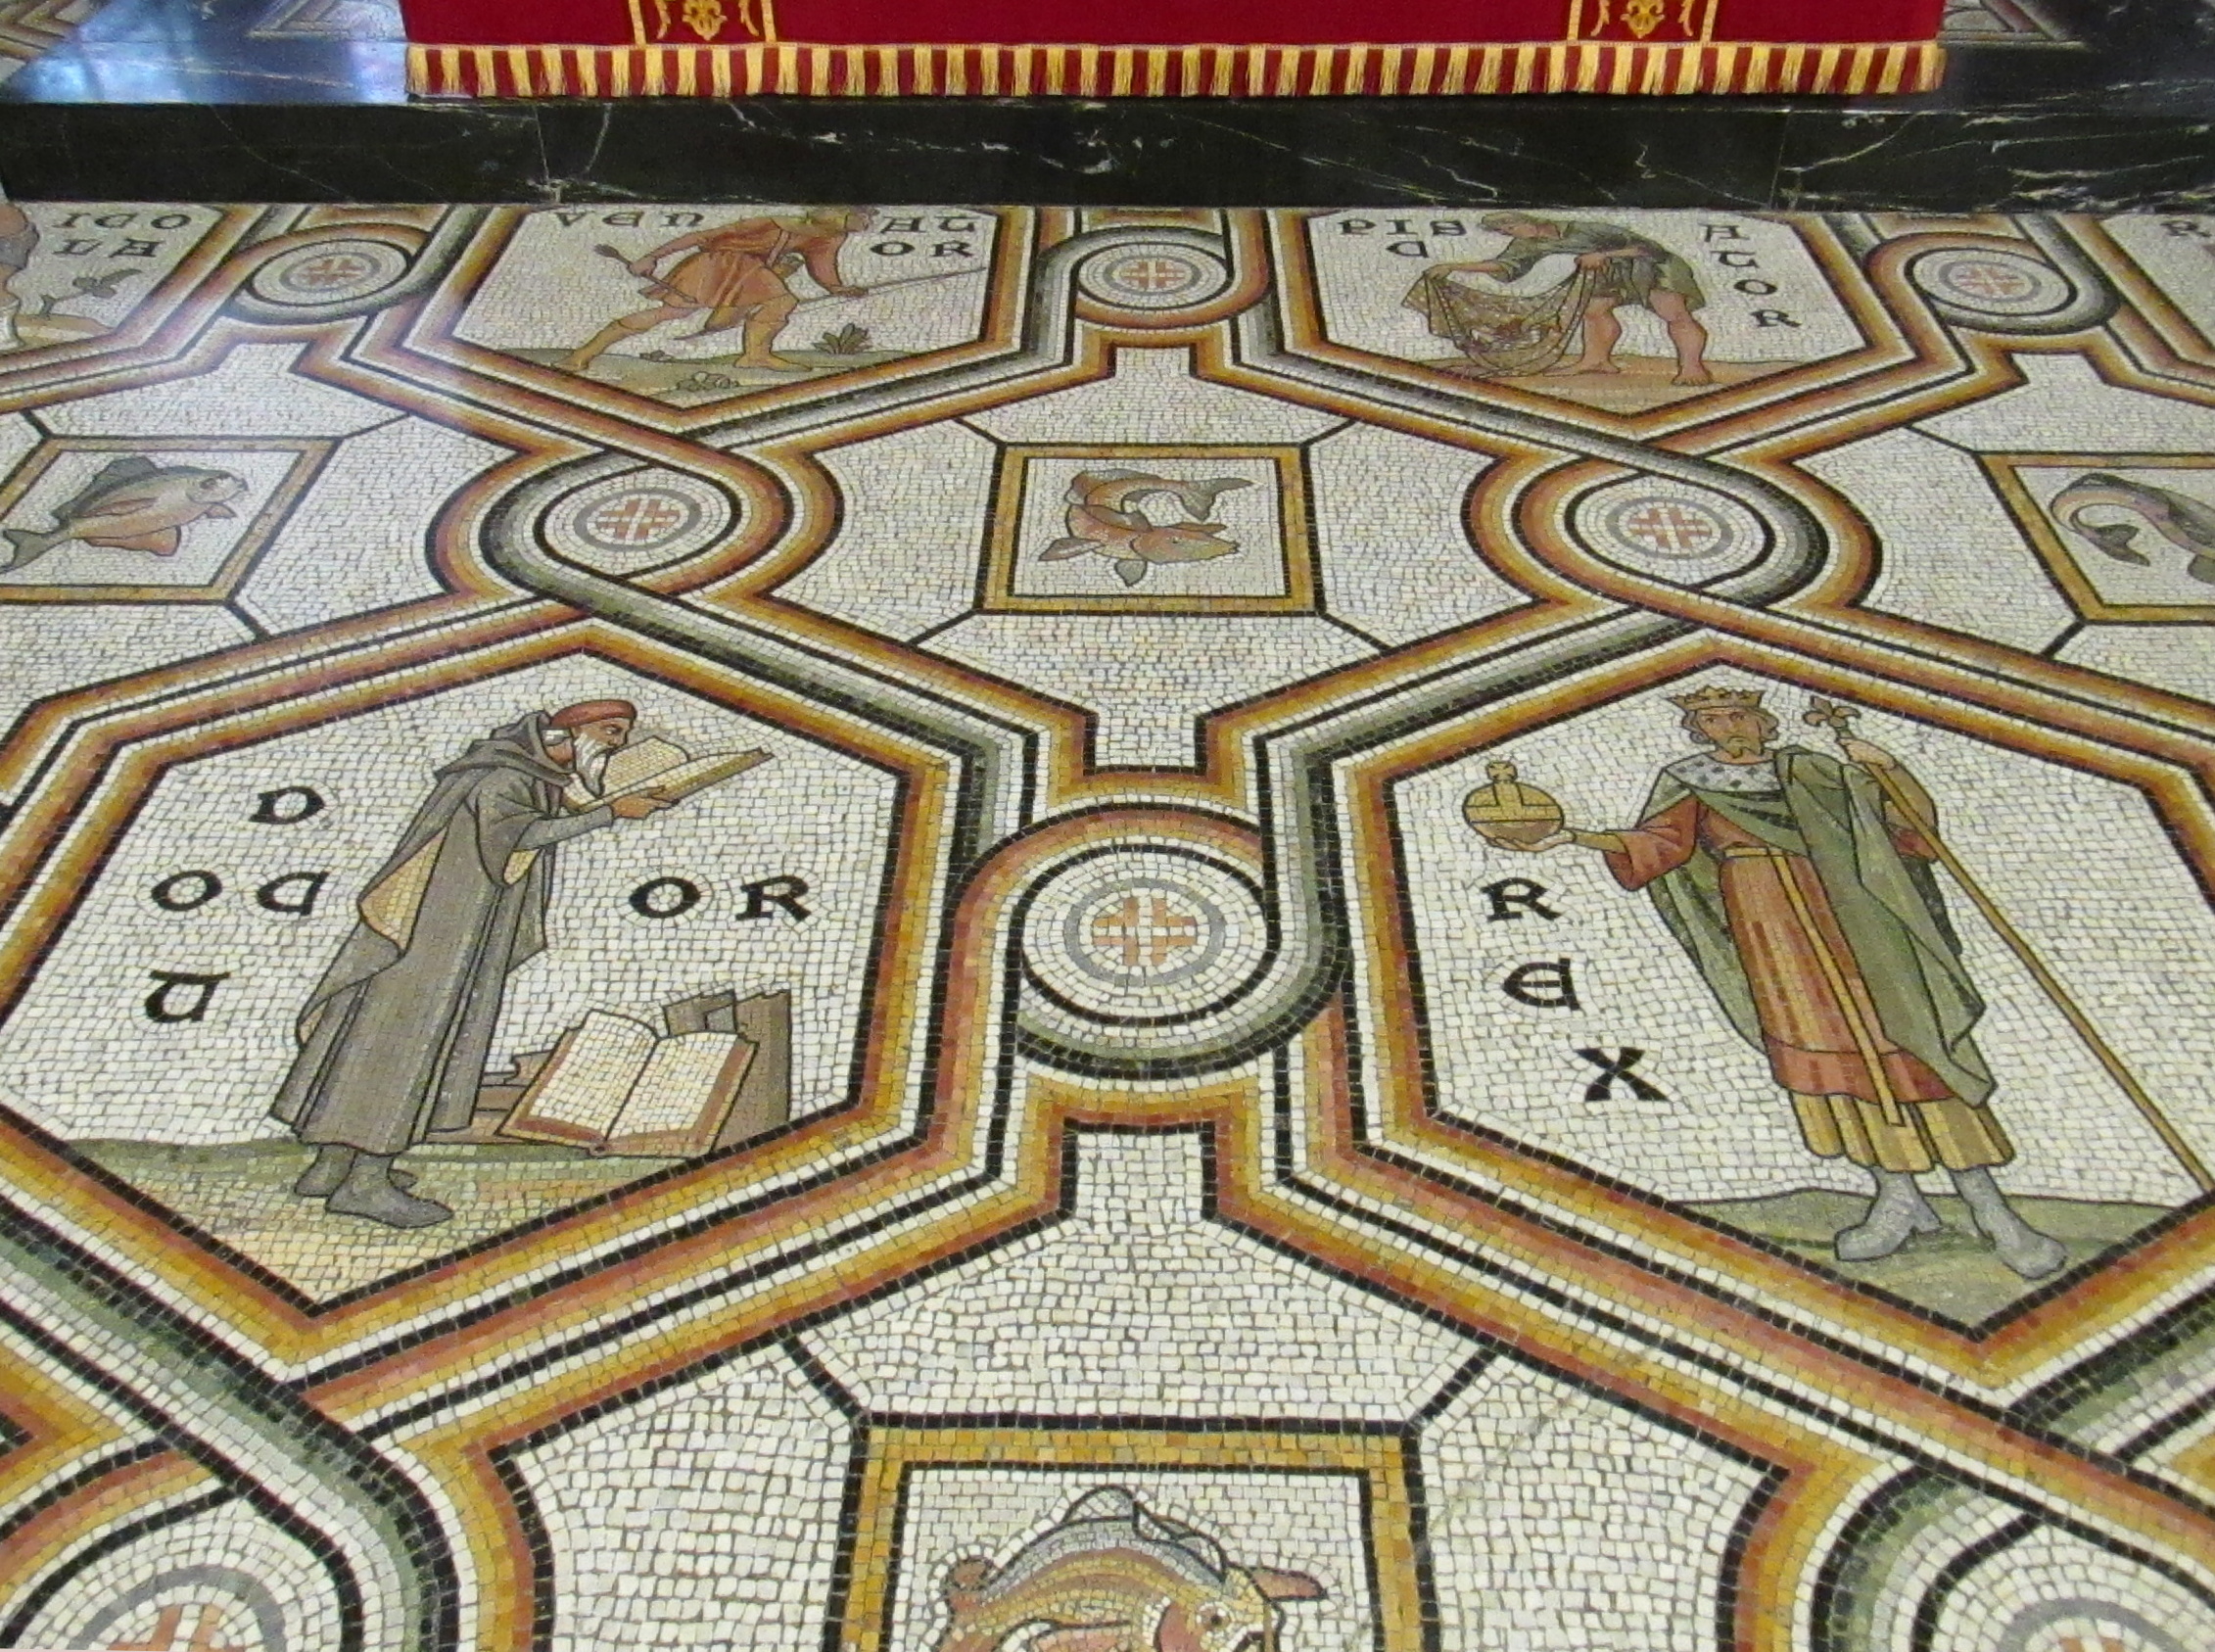 Mosaic floor in chancel of Saint Fin Barre's Cathedral, Cork